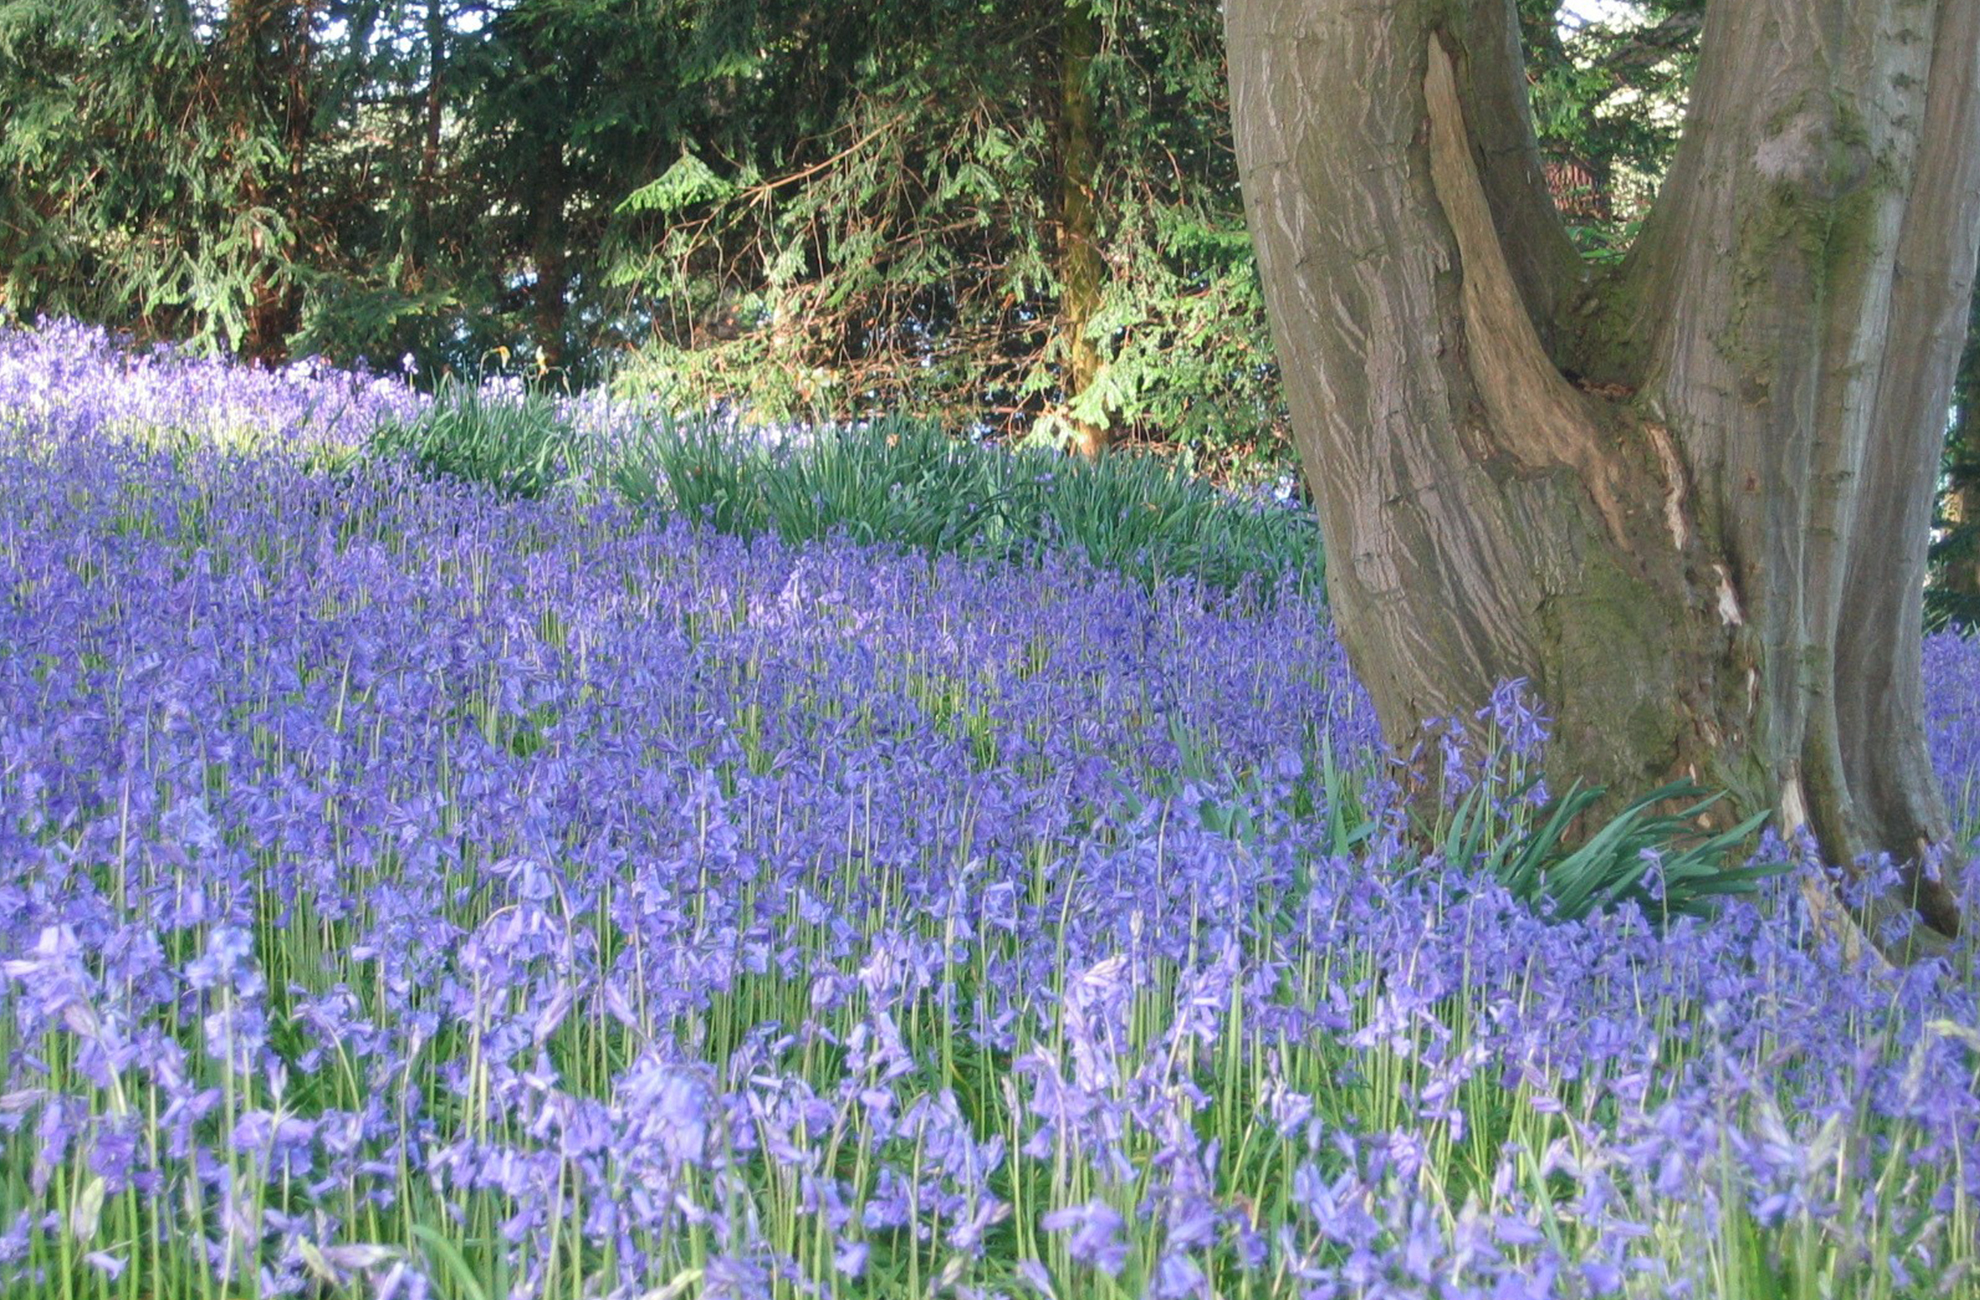 Pretty bluebell field in the grounds of Combermere Abbey in Shropshire and Cheshire